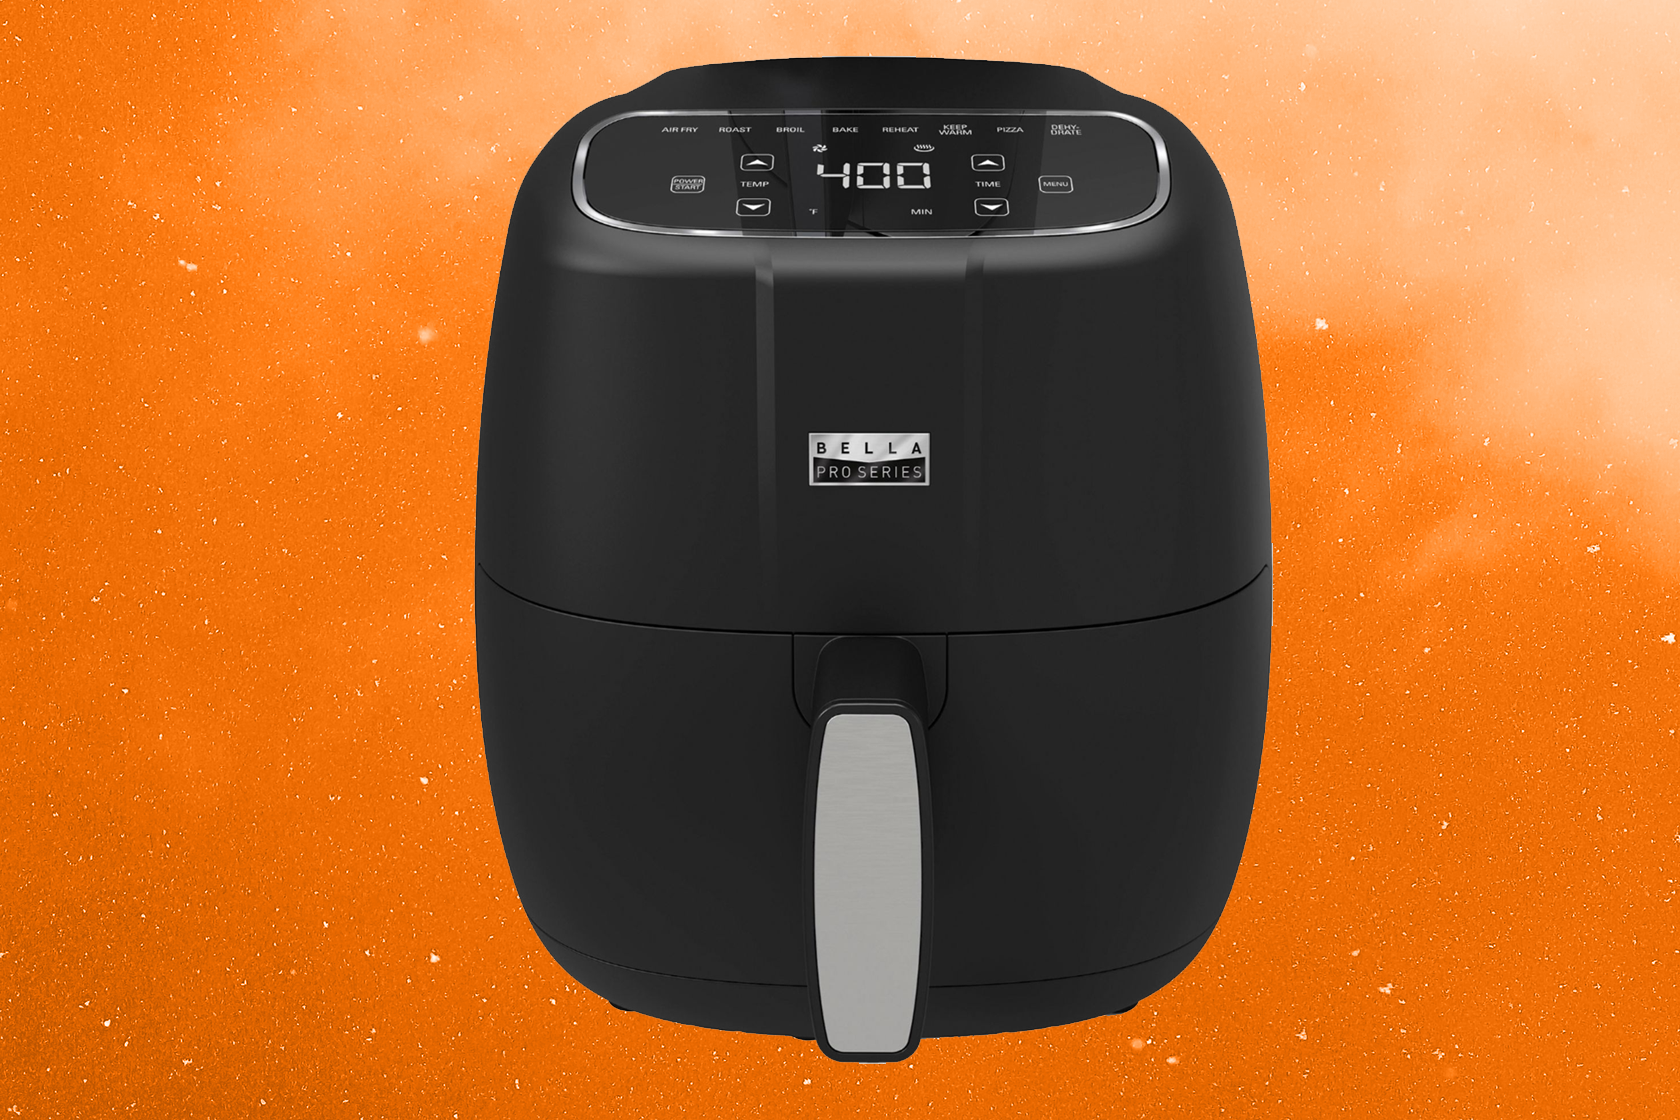 This Bella Air fryer is just $35 at Best Buy right now